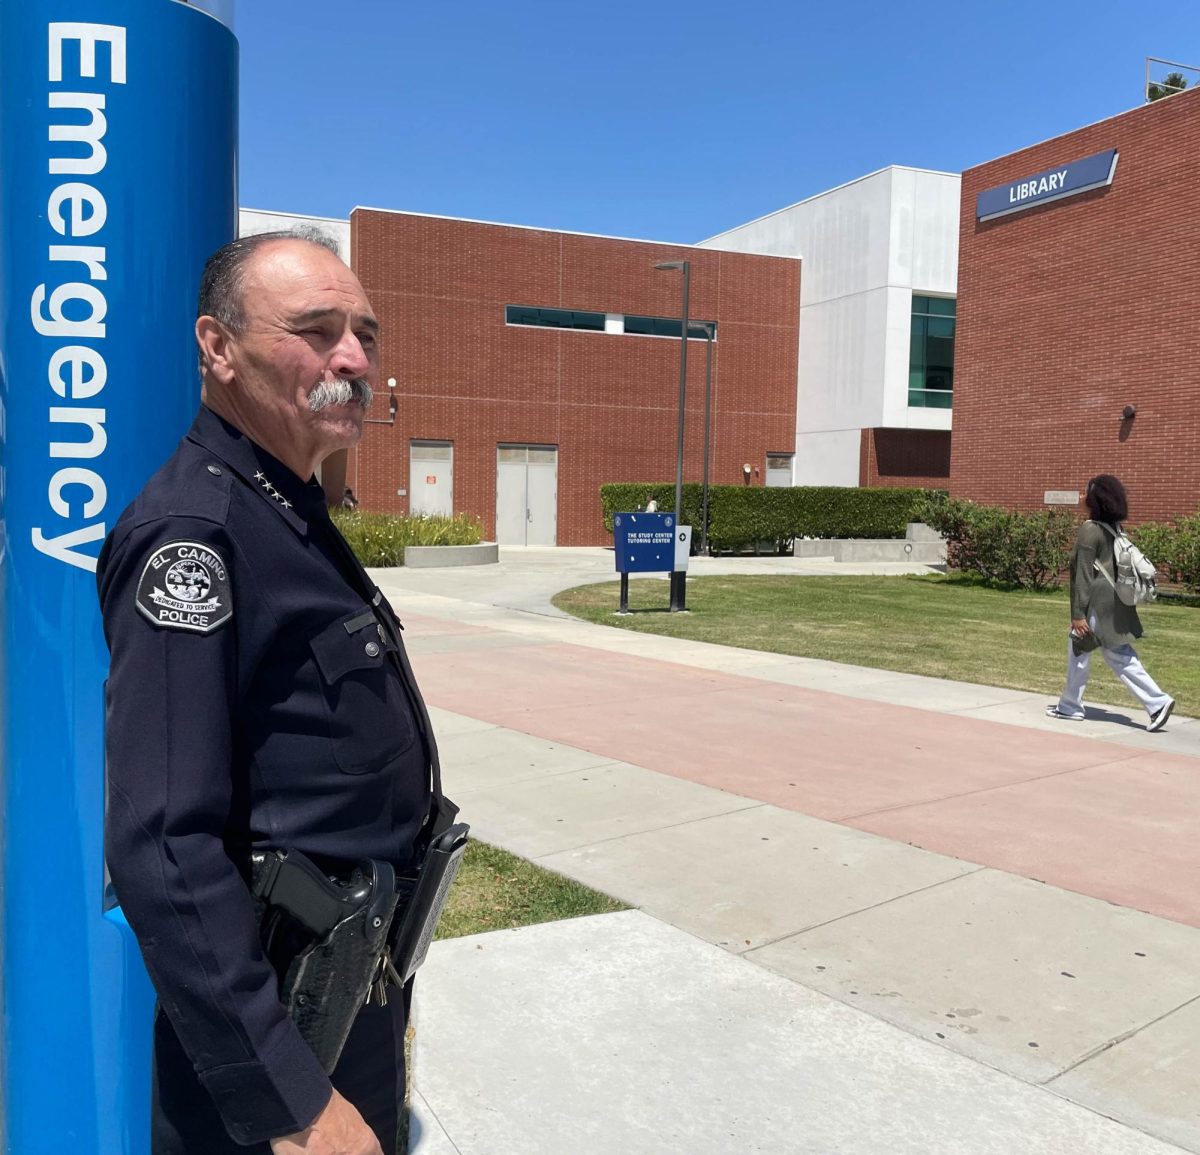 El Camino College Police Department Chief Michael Trevis leans against a more recently installed Blue Pole near the Behavioral and Social Sciences Building on Tuesday, April 30. (Joshua Flores | The Union)